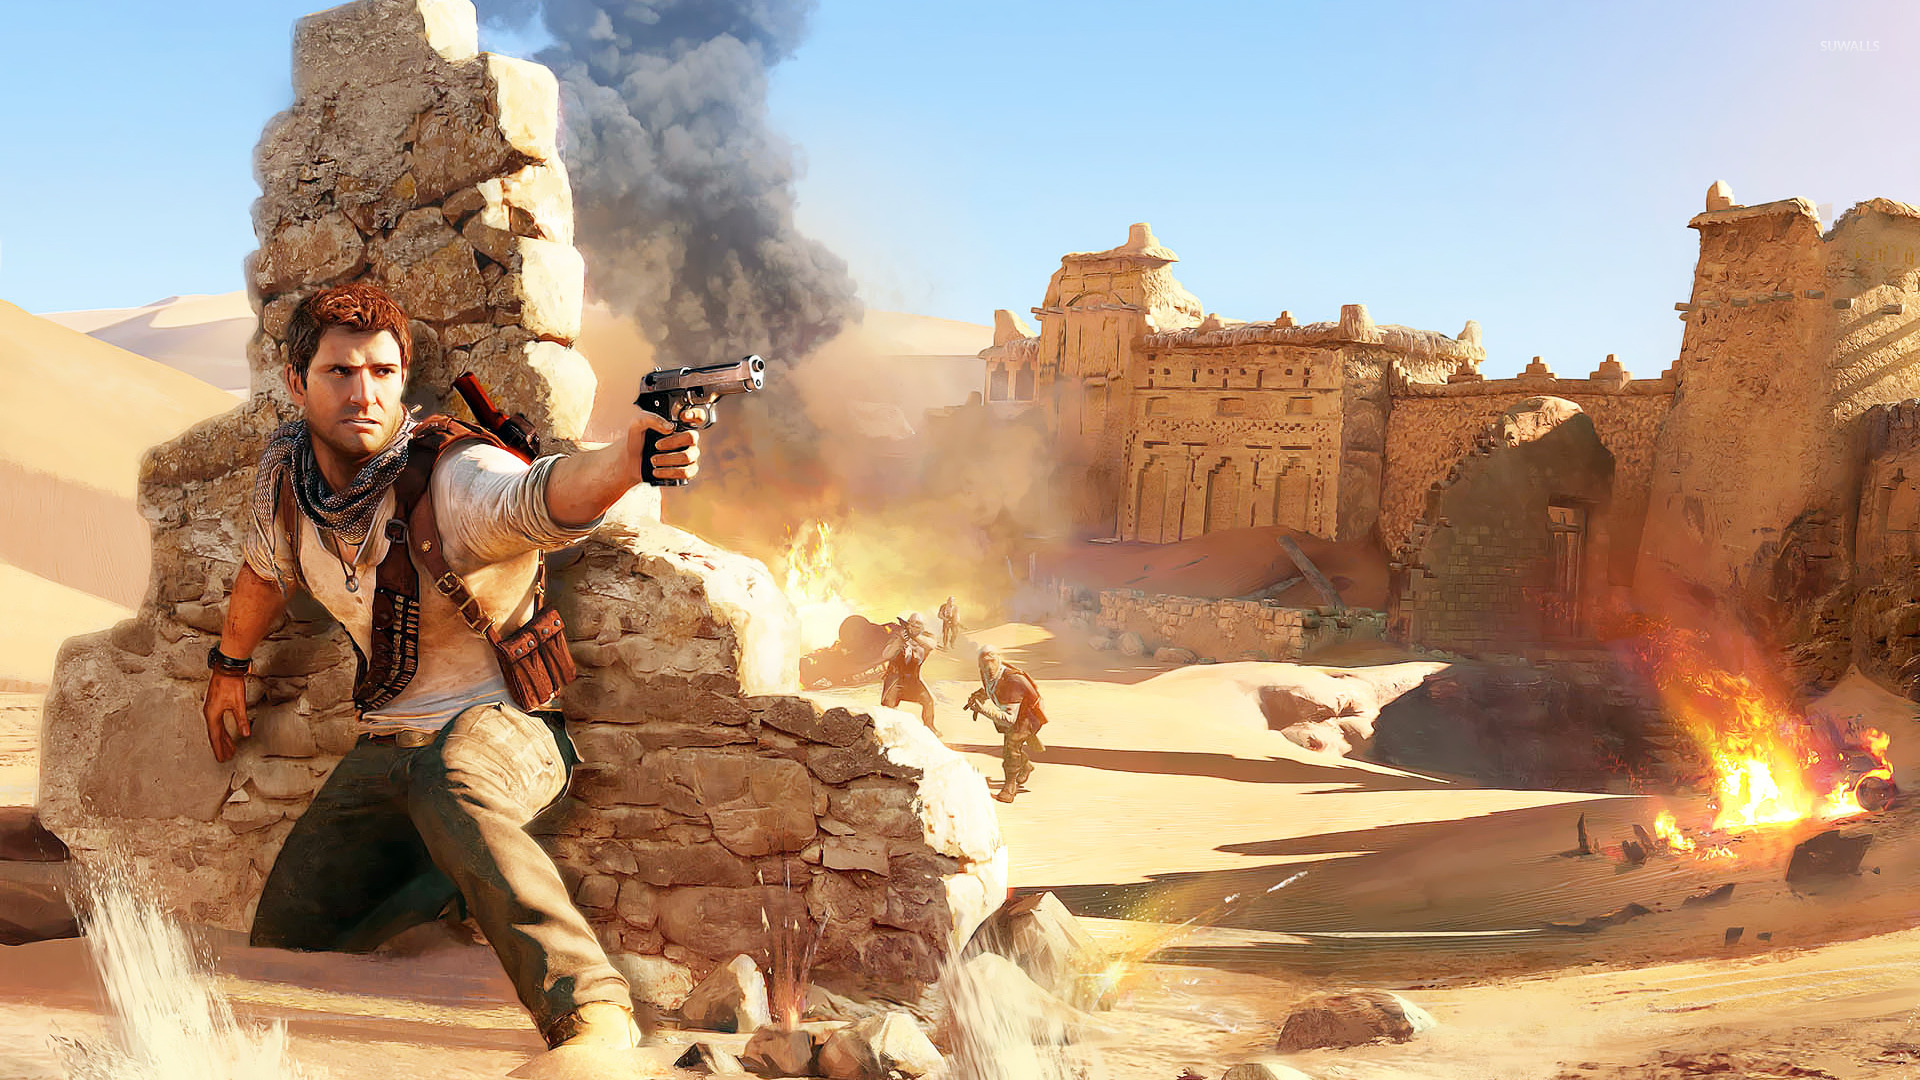 uncharted 2 pc game torrent